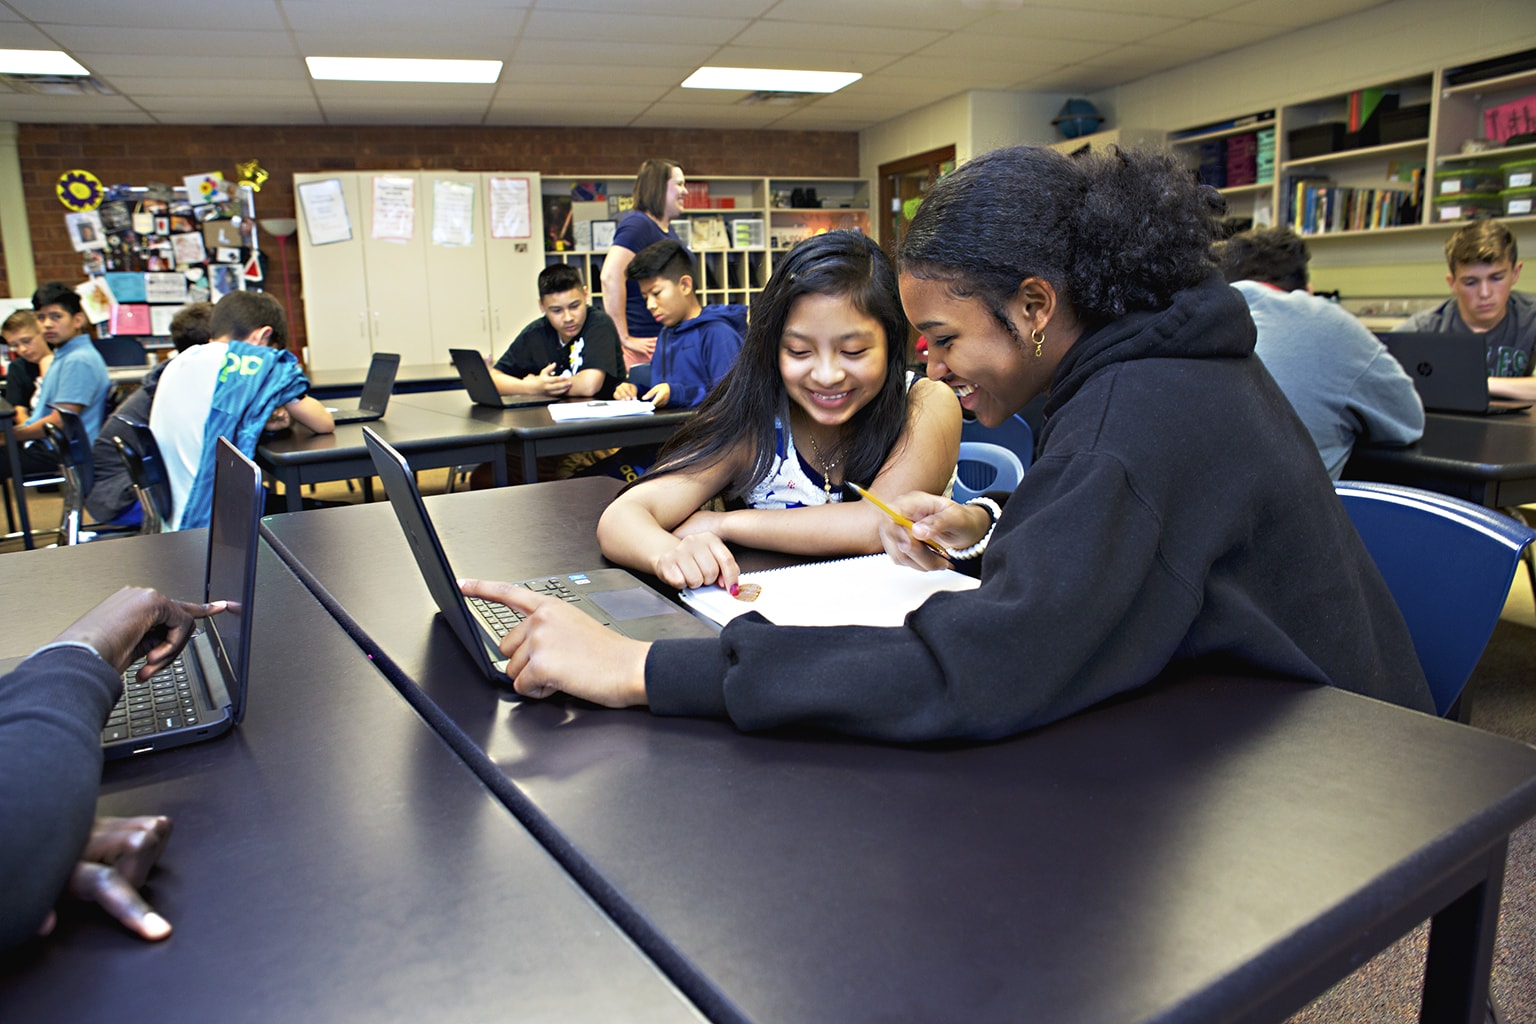 Two students smiling and working together at a desk in a classroom with other students and laptops around them.